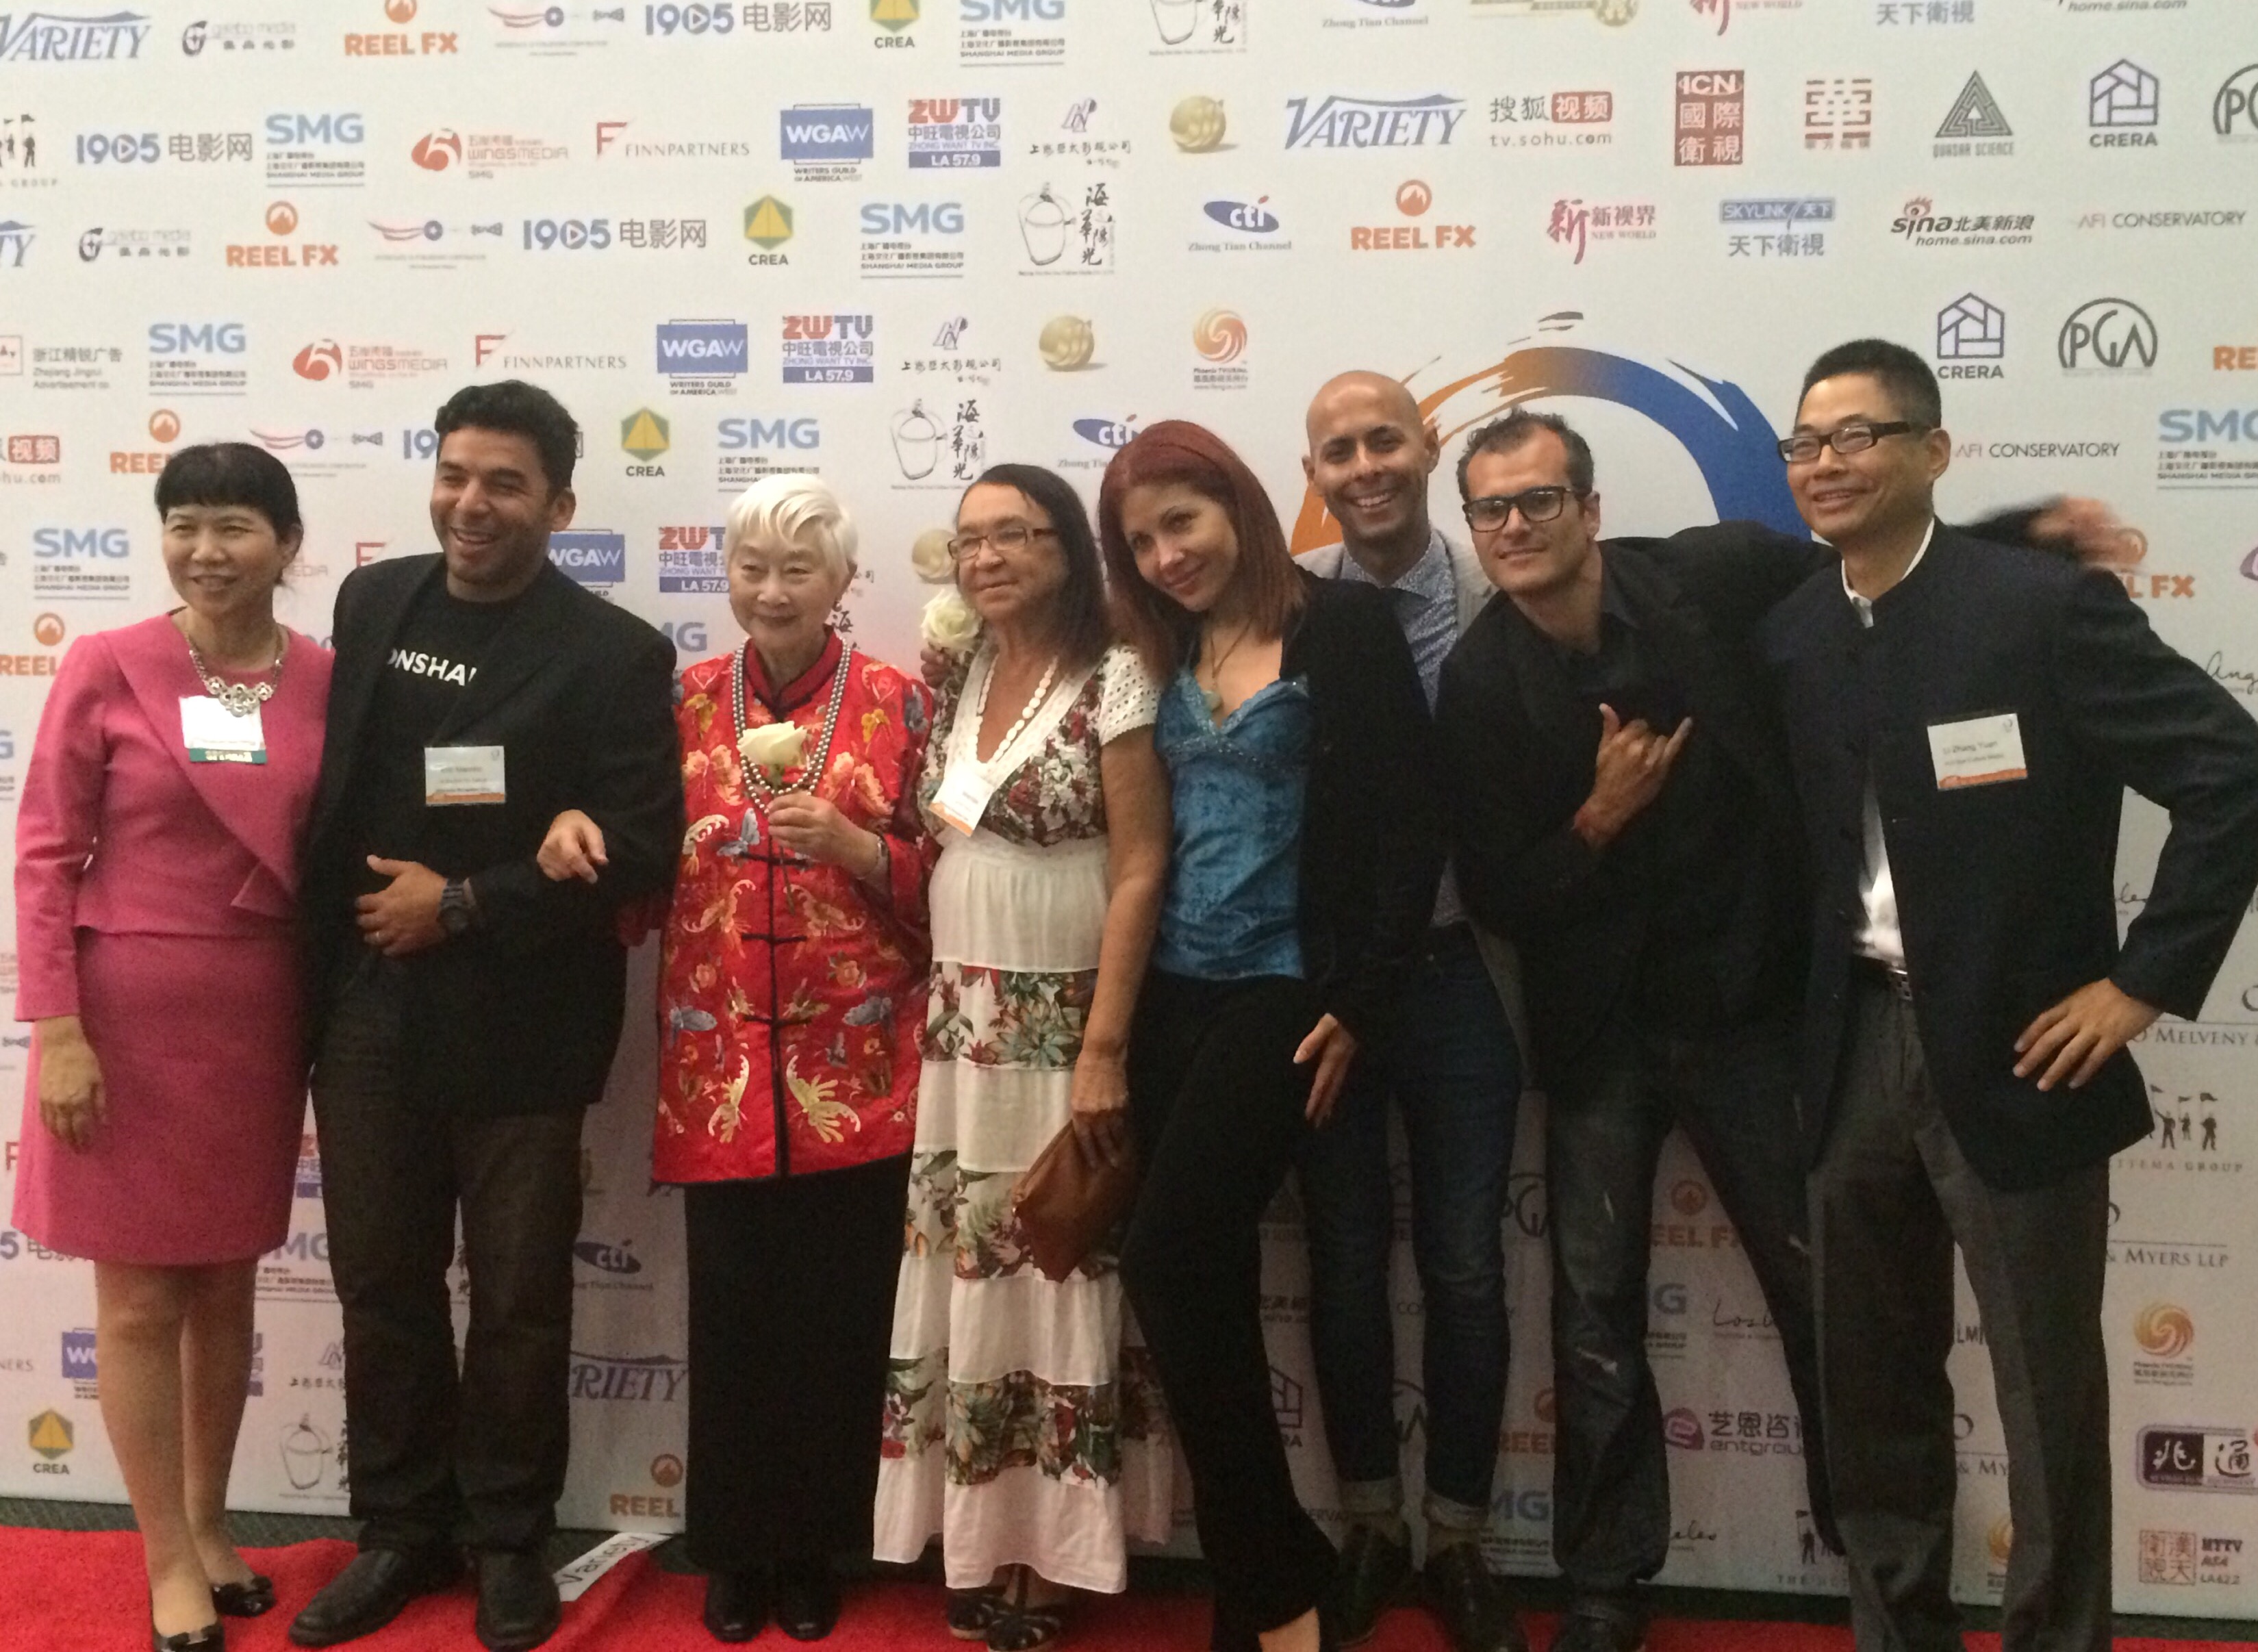 US China Film & TV Industry Expo 2015.